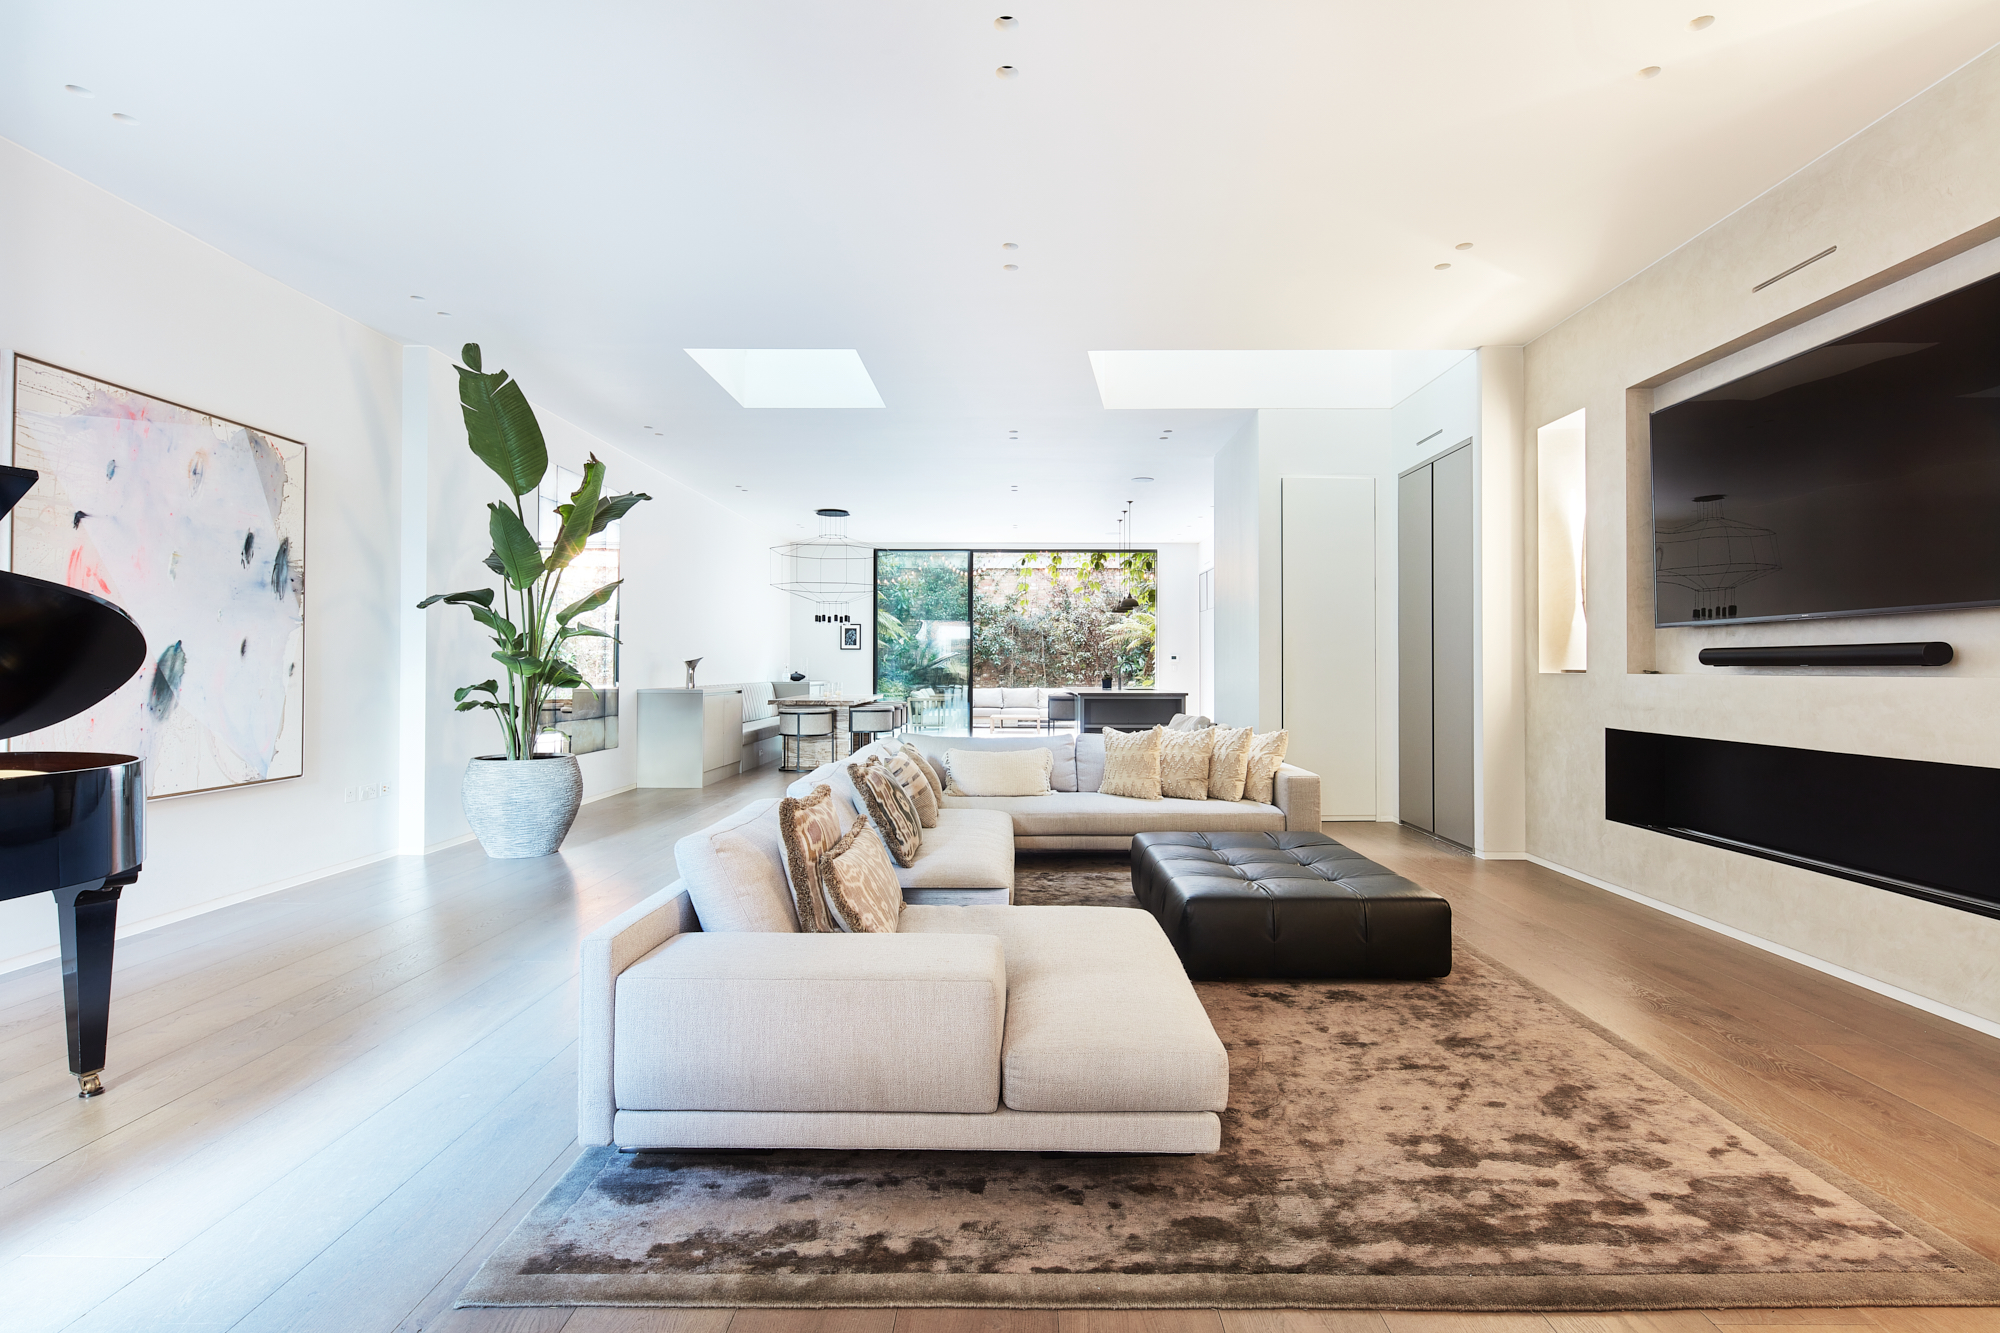 Luxury home for rent in London, Notting Hill W2 - contemporary reception room with modern furniture and skylights